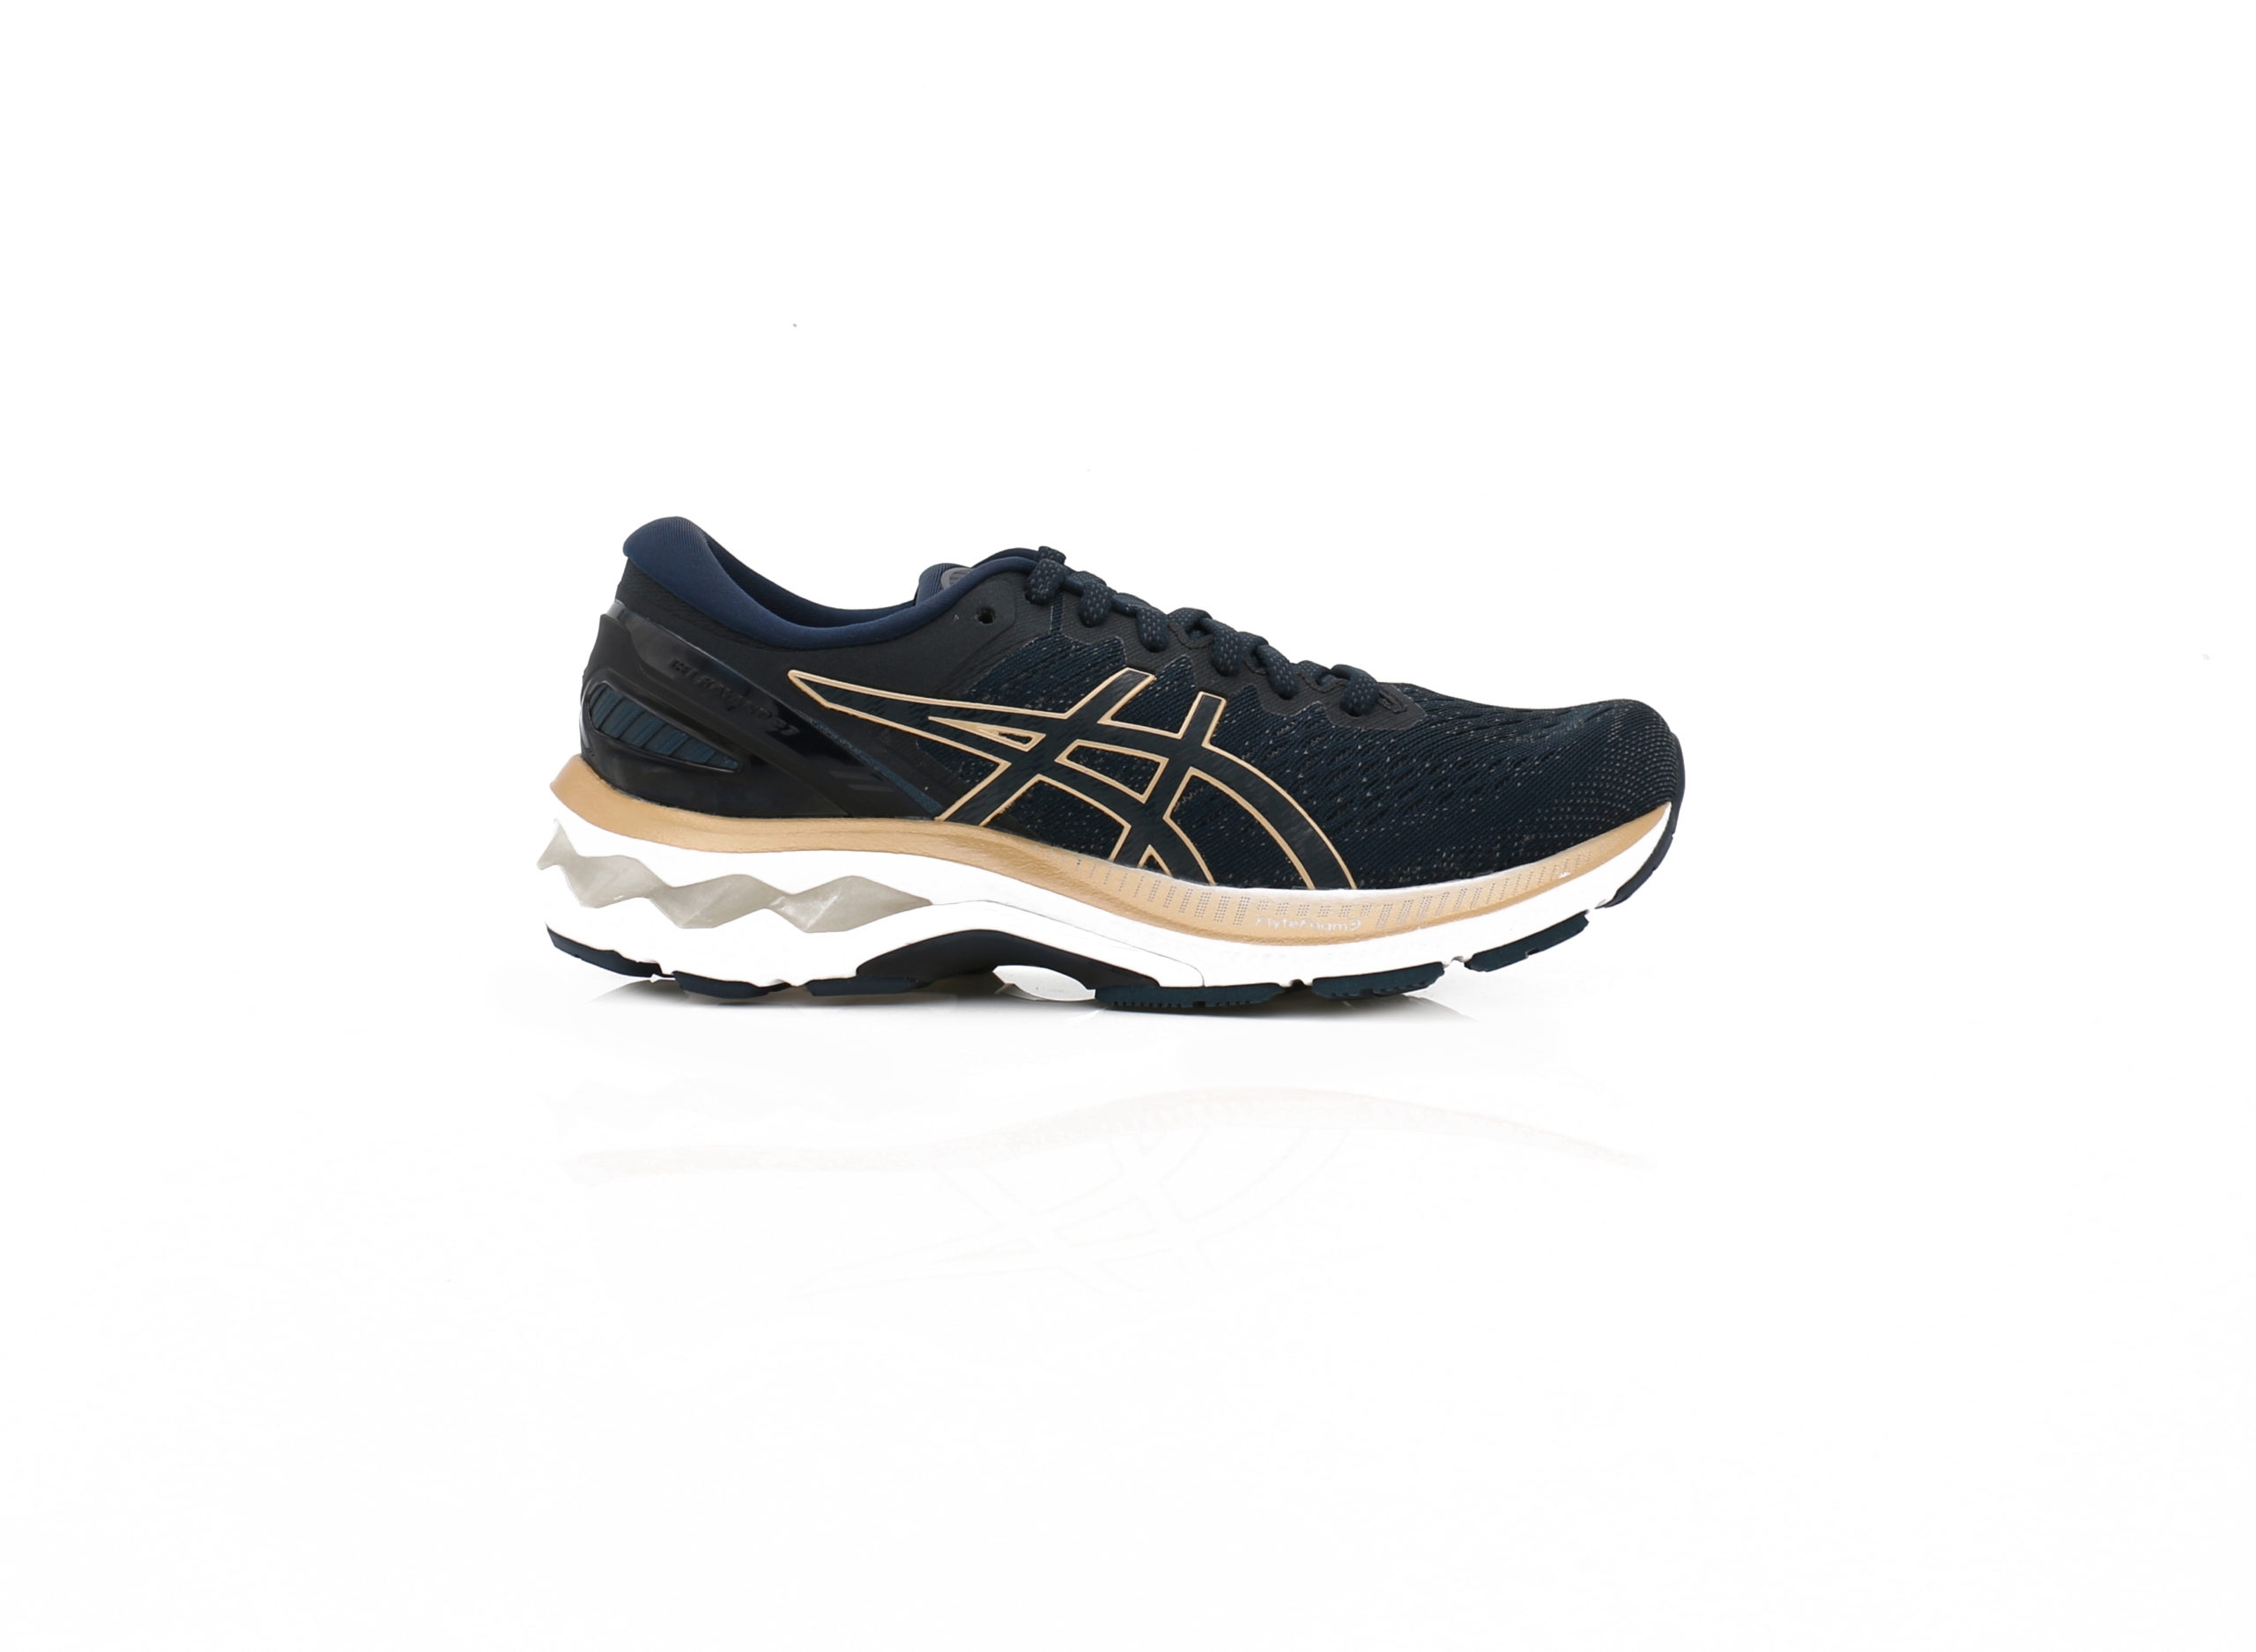 Womens Asics Gel Kayano 27 – Navy Running Trainers – Suitable For Achilles Pain / Collapsed Arches – Size 4 – Gold / Navy Blue – Synthetic Fabric